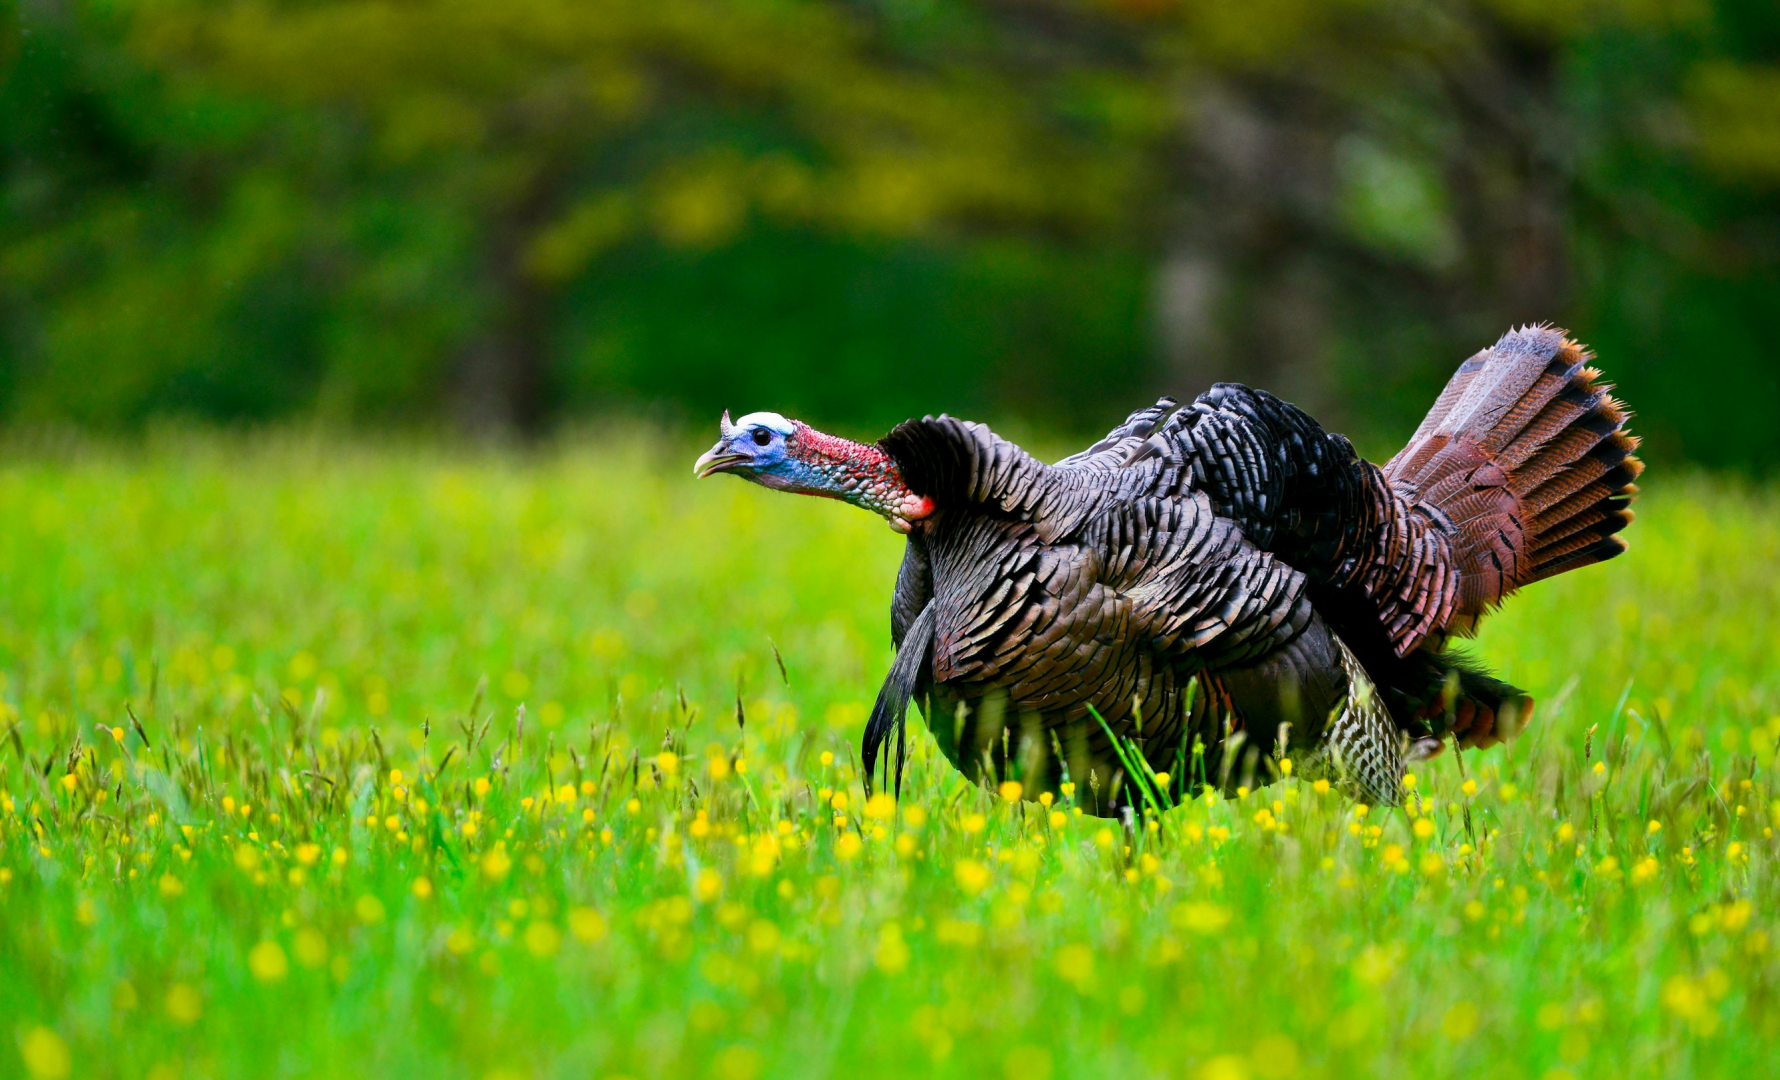 One Secret for Success: Midday Turkey Hunting